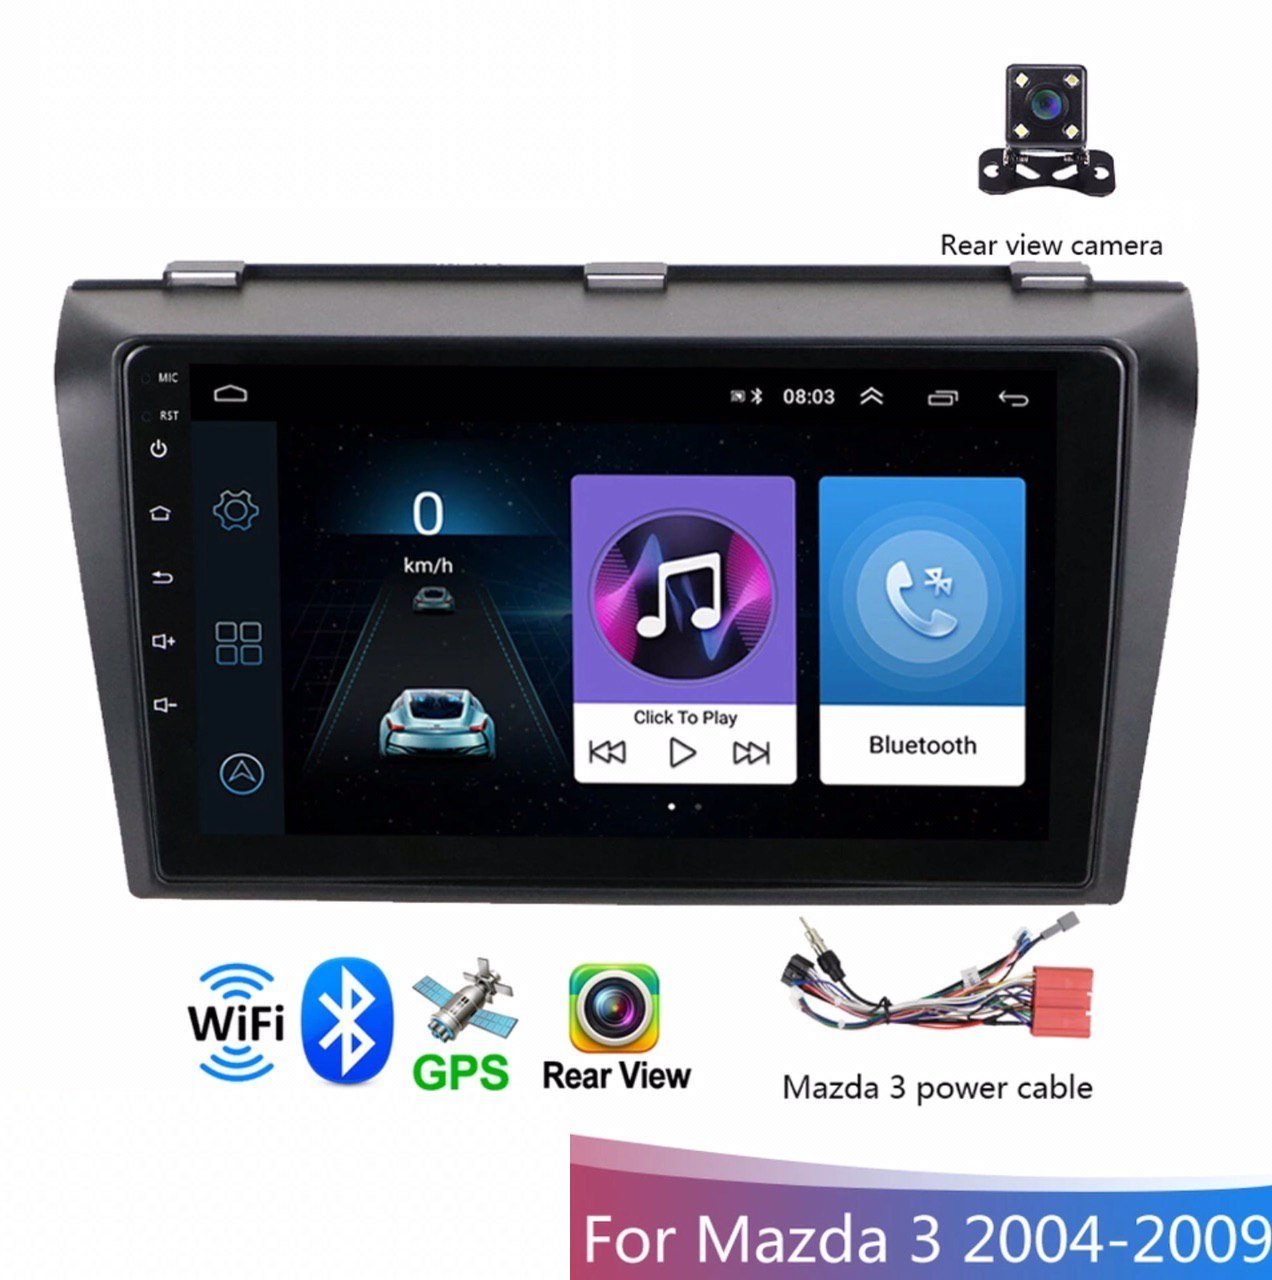 Mazda 3 Android Car GPS Stereo 1G 16G WIFI Free MAP Quad Core 2 din Multimedia for Mazda 3 2004-2009 Mazda 3 Head Unit Replacement